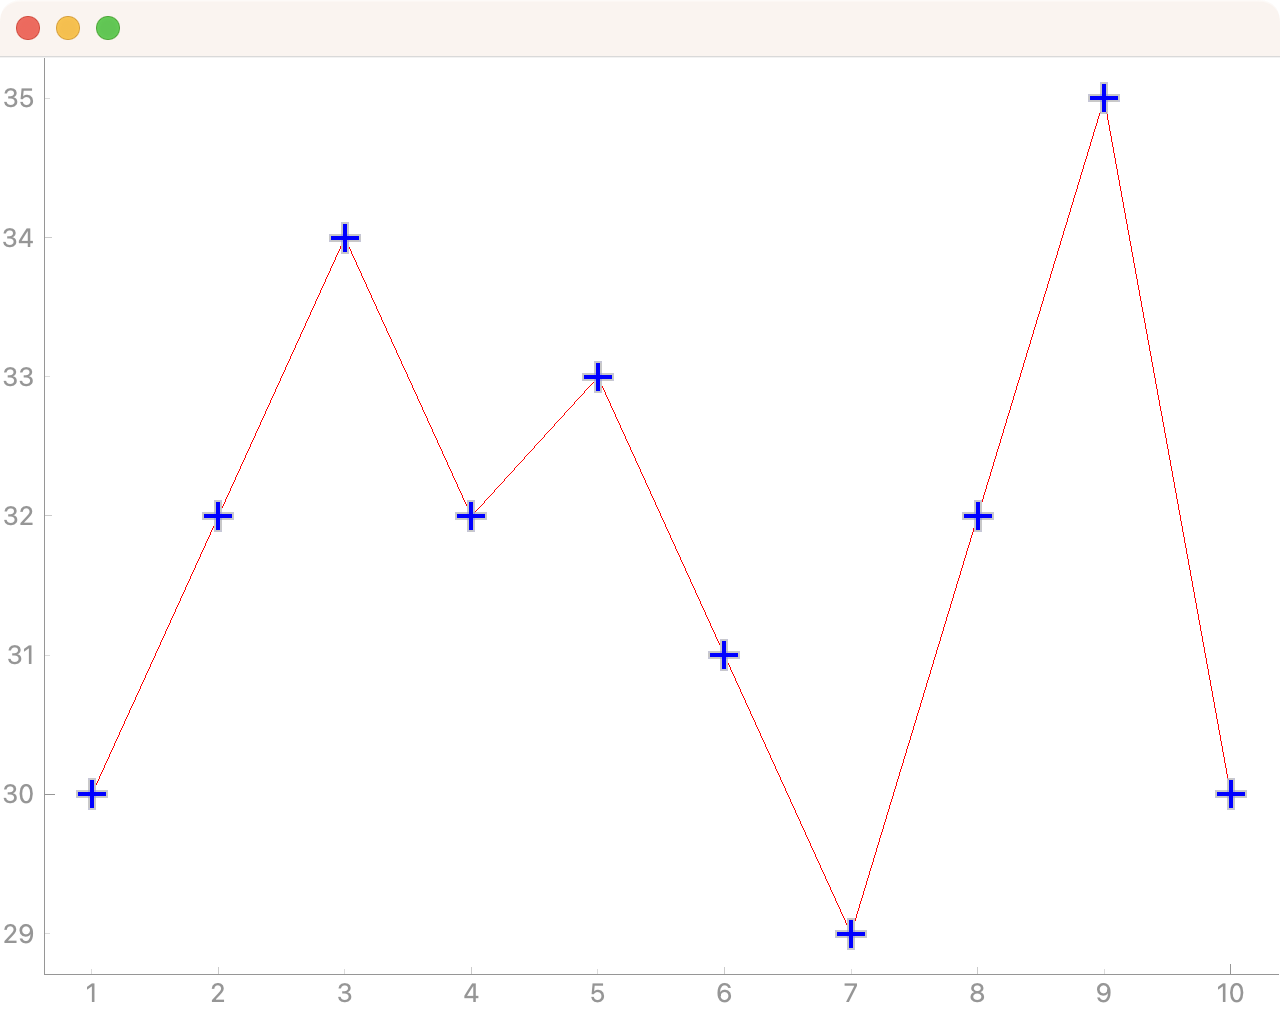 PyQtGraph plot with a plus sign as a point marker